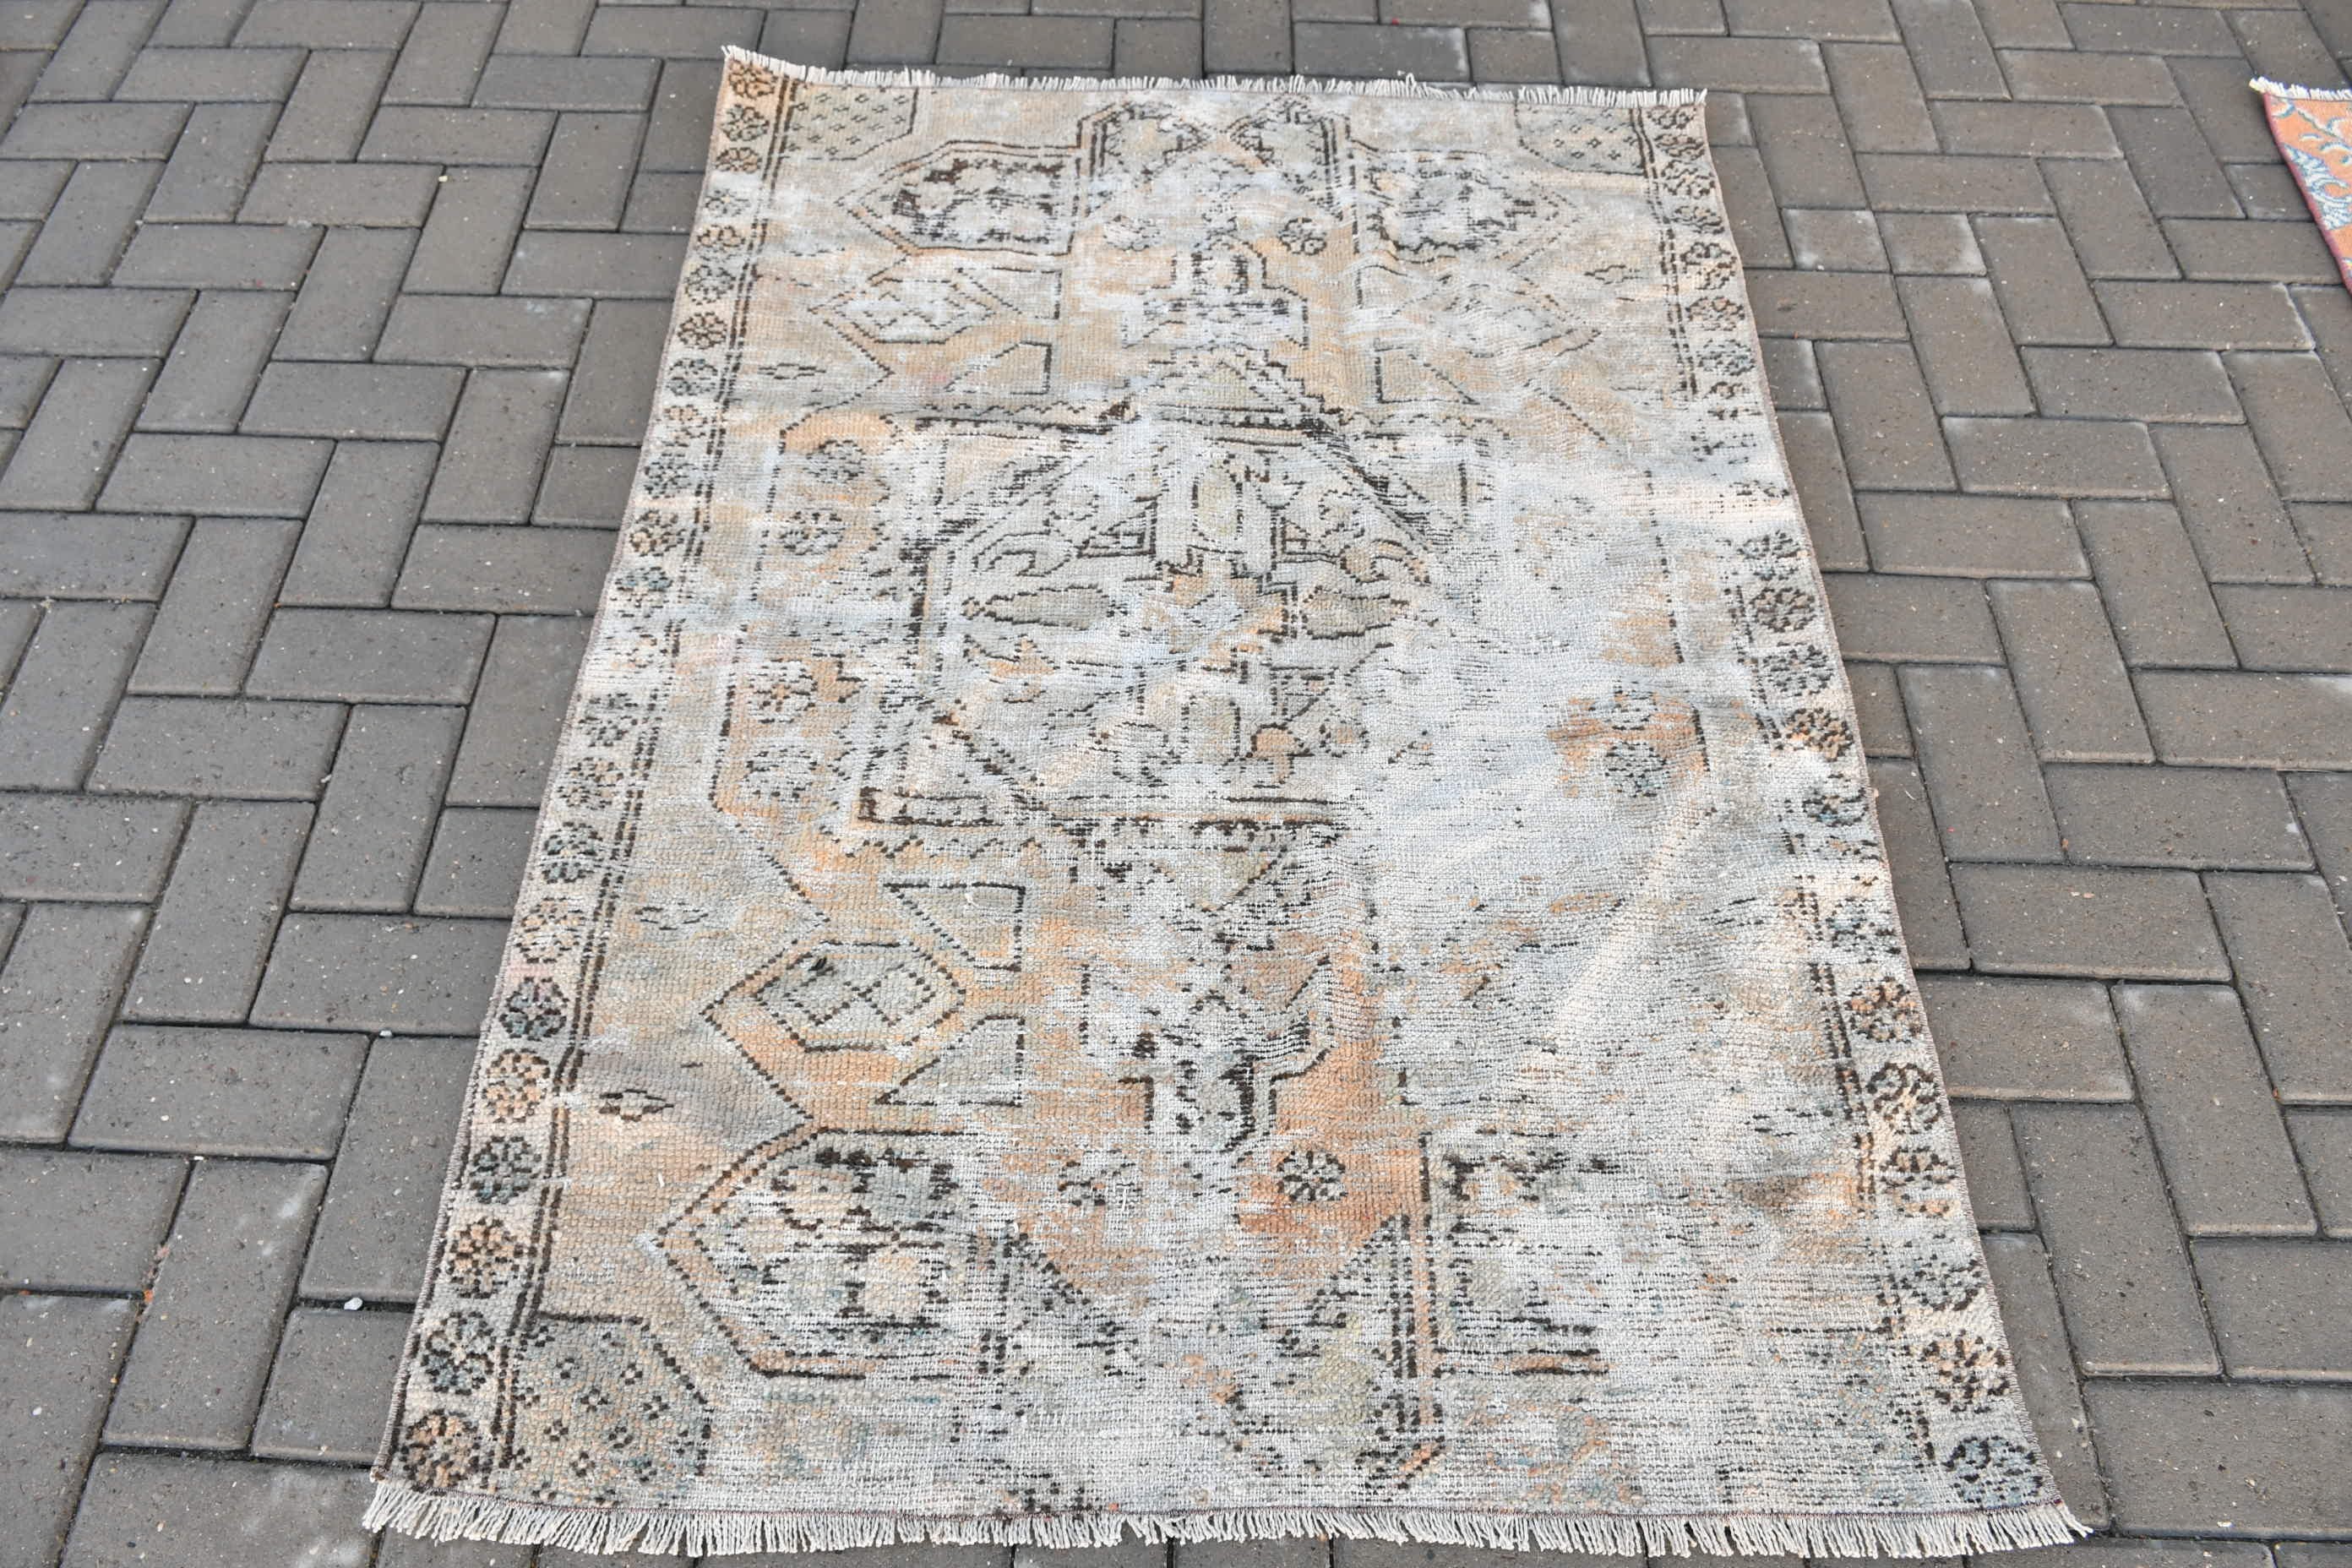 Rugs for Entry, Oushak Rug, Turkish Rugs, Entry Rug, Kitchen Rug, 3.5x4.9 ft Accent Rugs, Wool Rugs, Vintage Rug, Beige Home Decor Rug